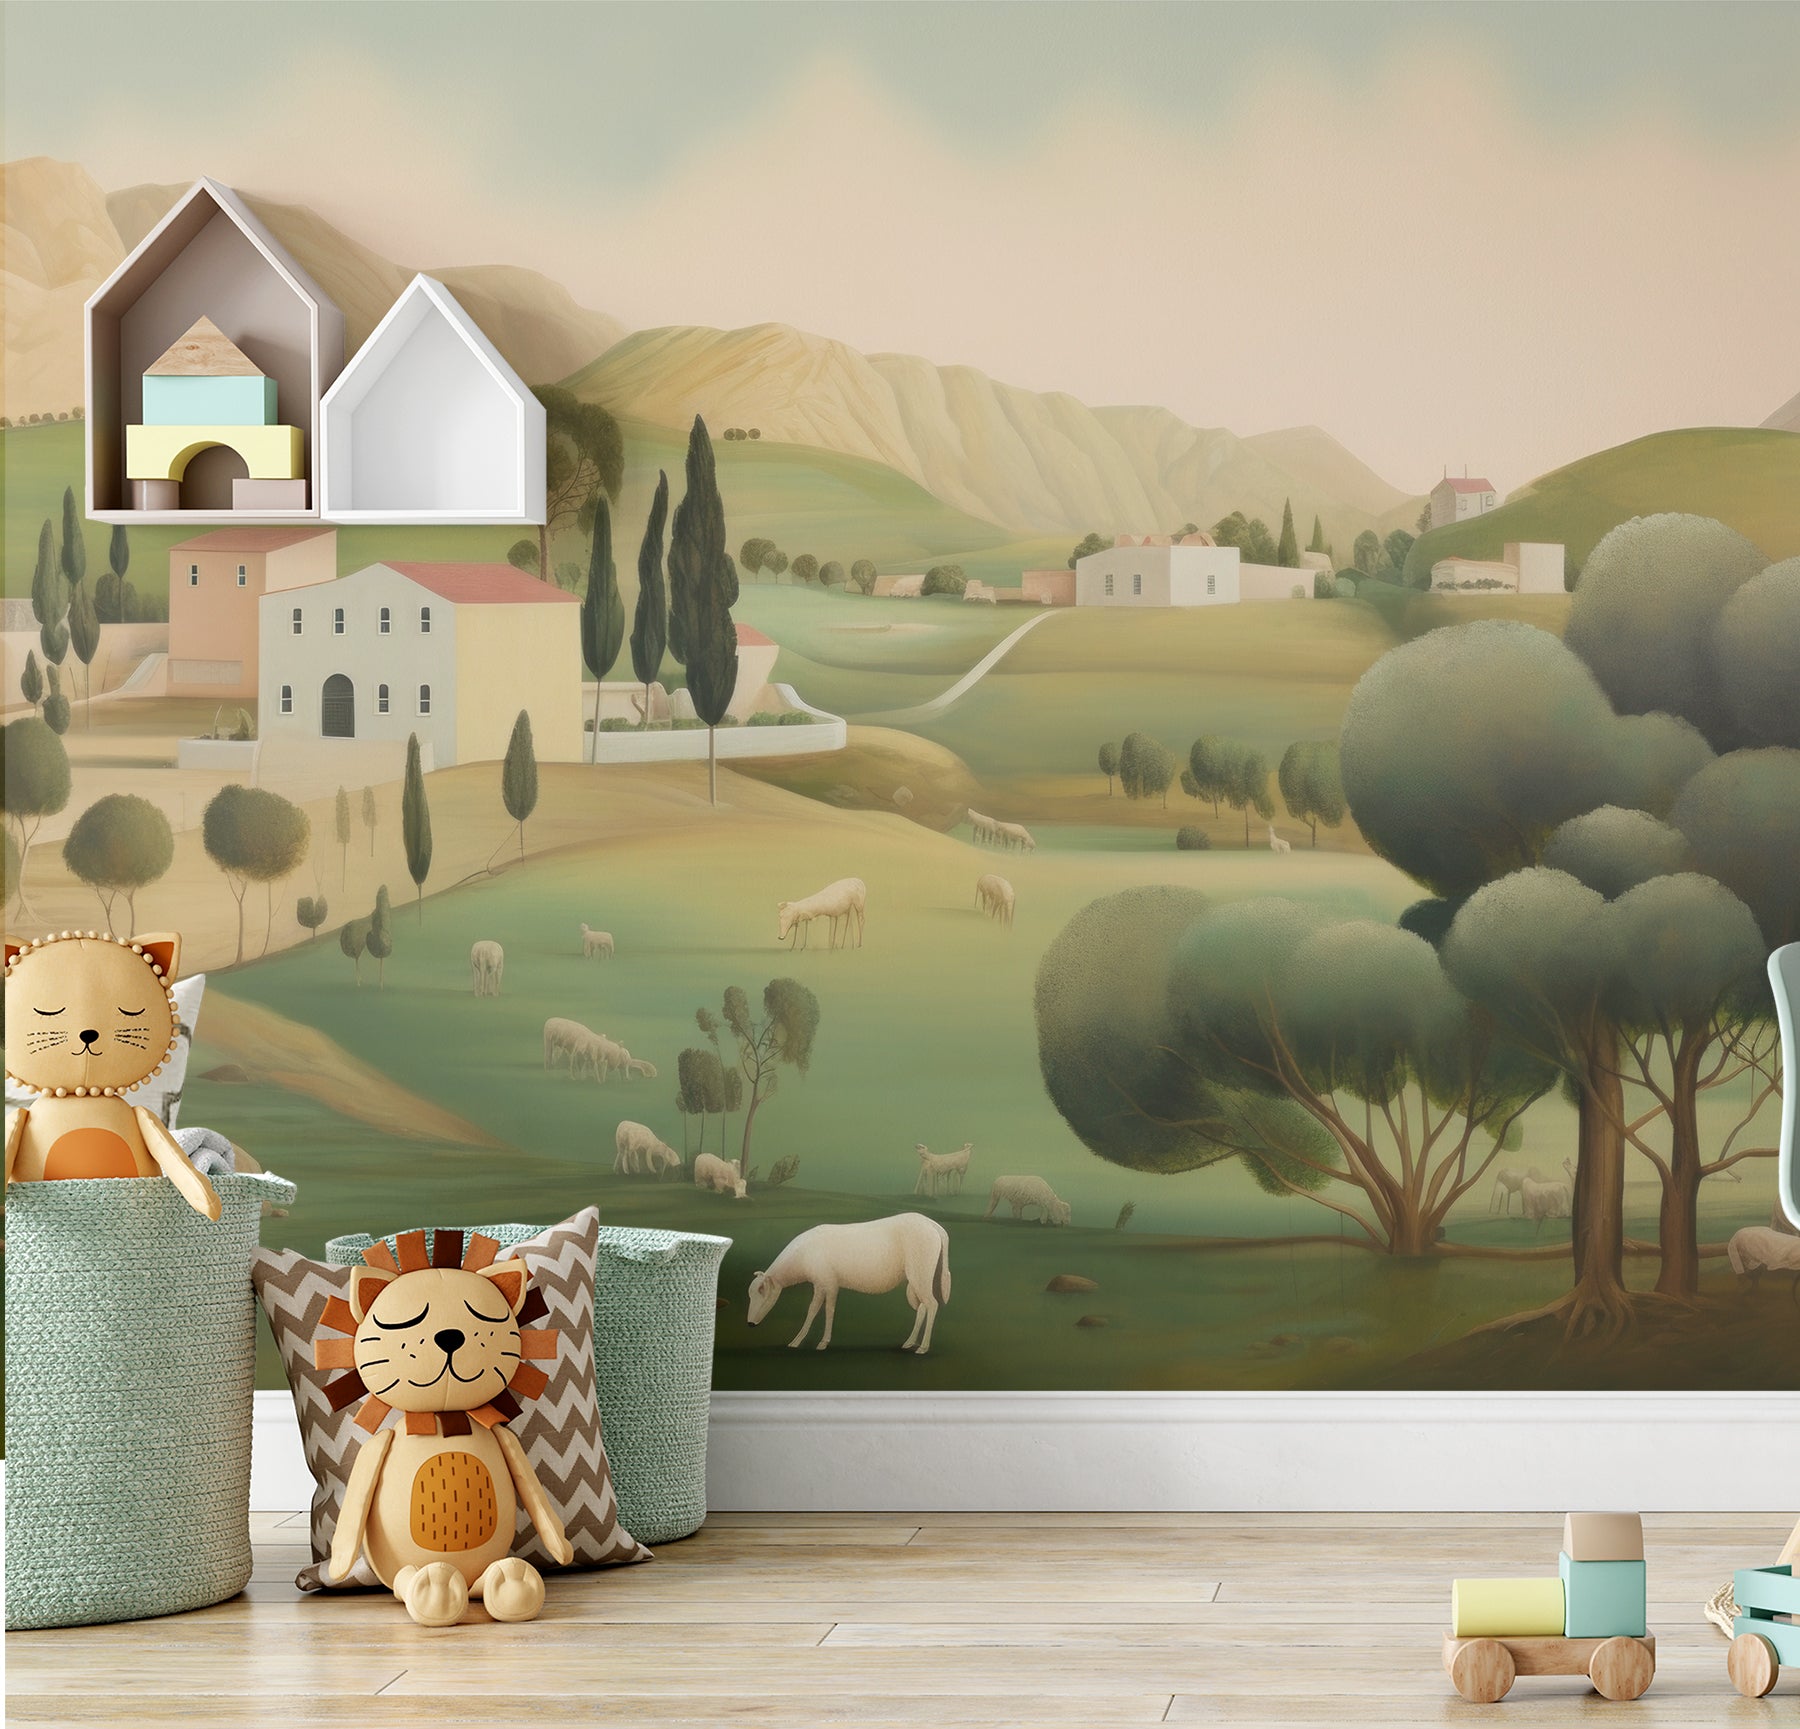  Interior design featuring a pastoral landscape mural in a child’s playroom with toys and children's furniture foregrounding.